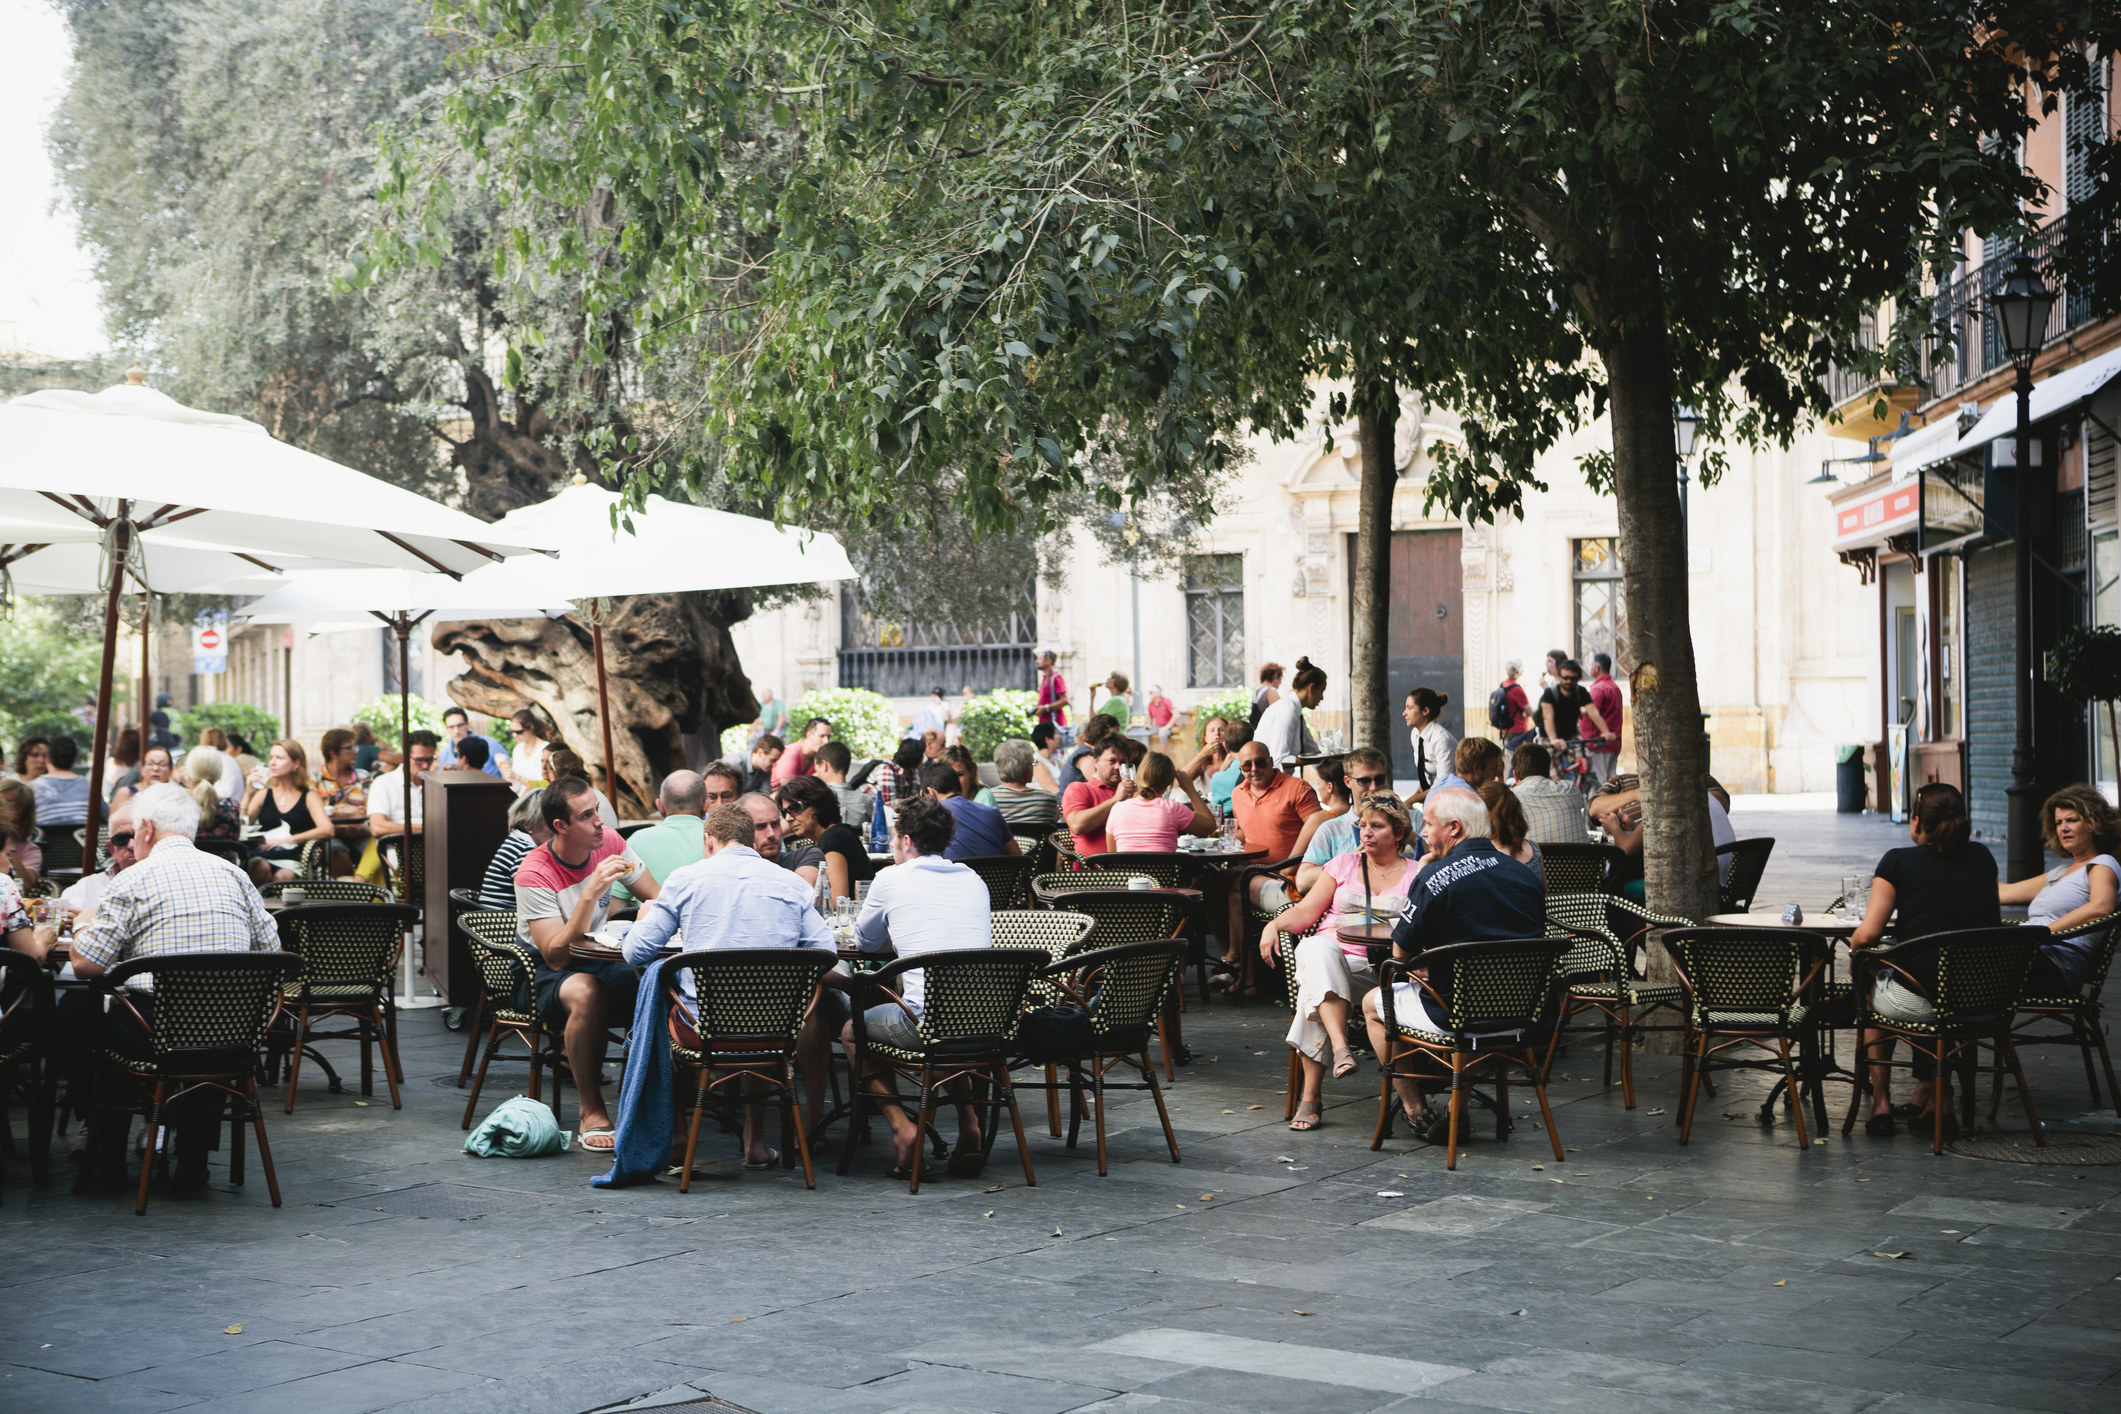 People dining outdoors in a plaza